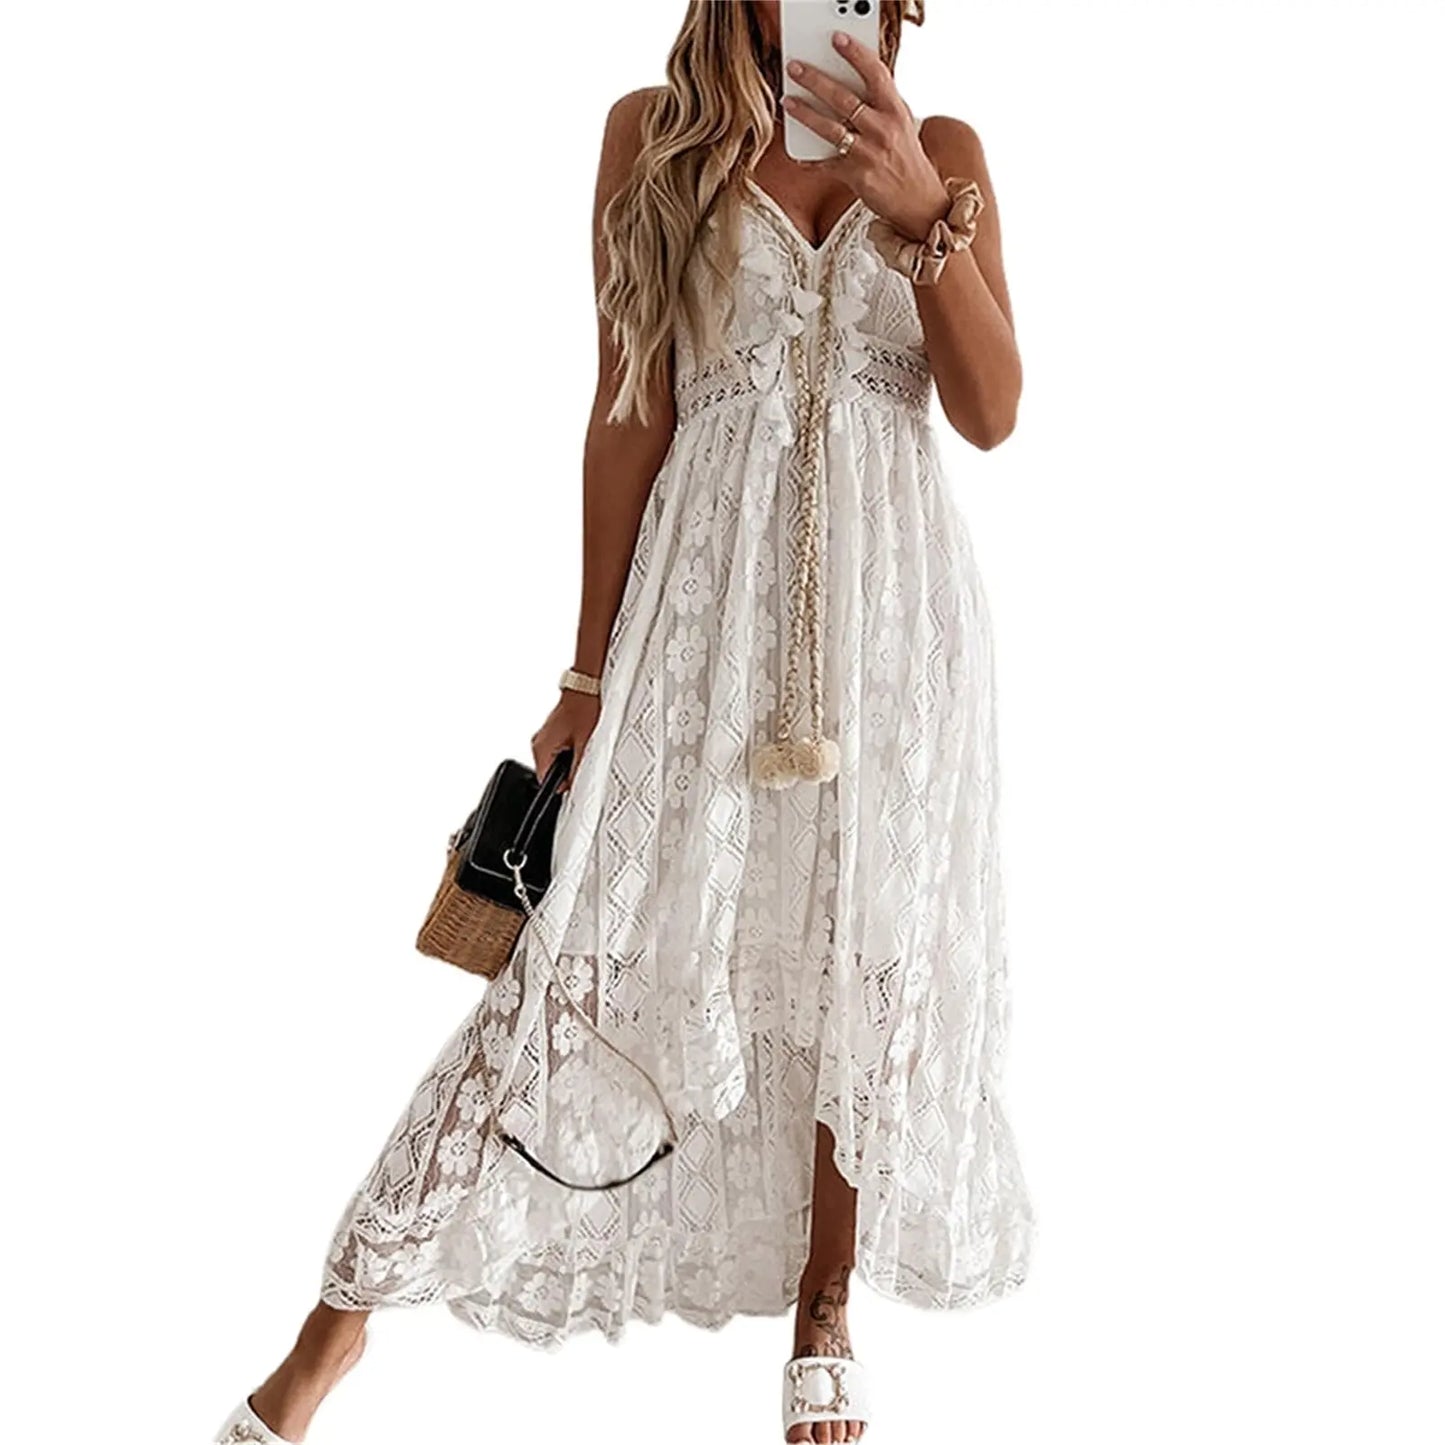 Summer White Dress For Woman 2023 Trendy Casual Beachwear Cover-ups Outfits New Boho Hippie Chic Long Maxi Dresses Elegant Party